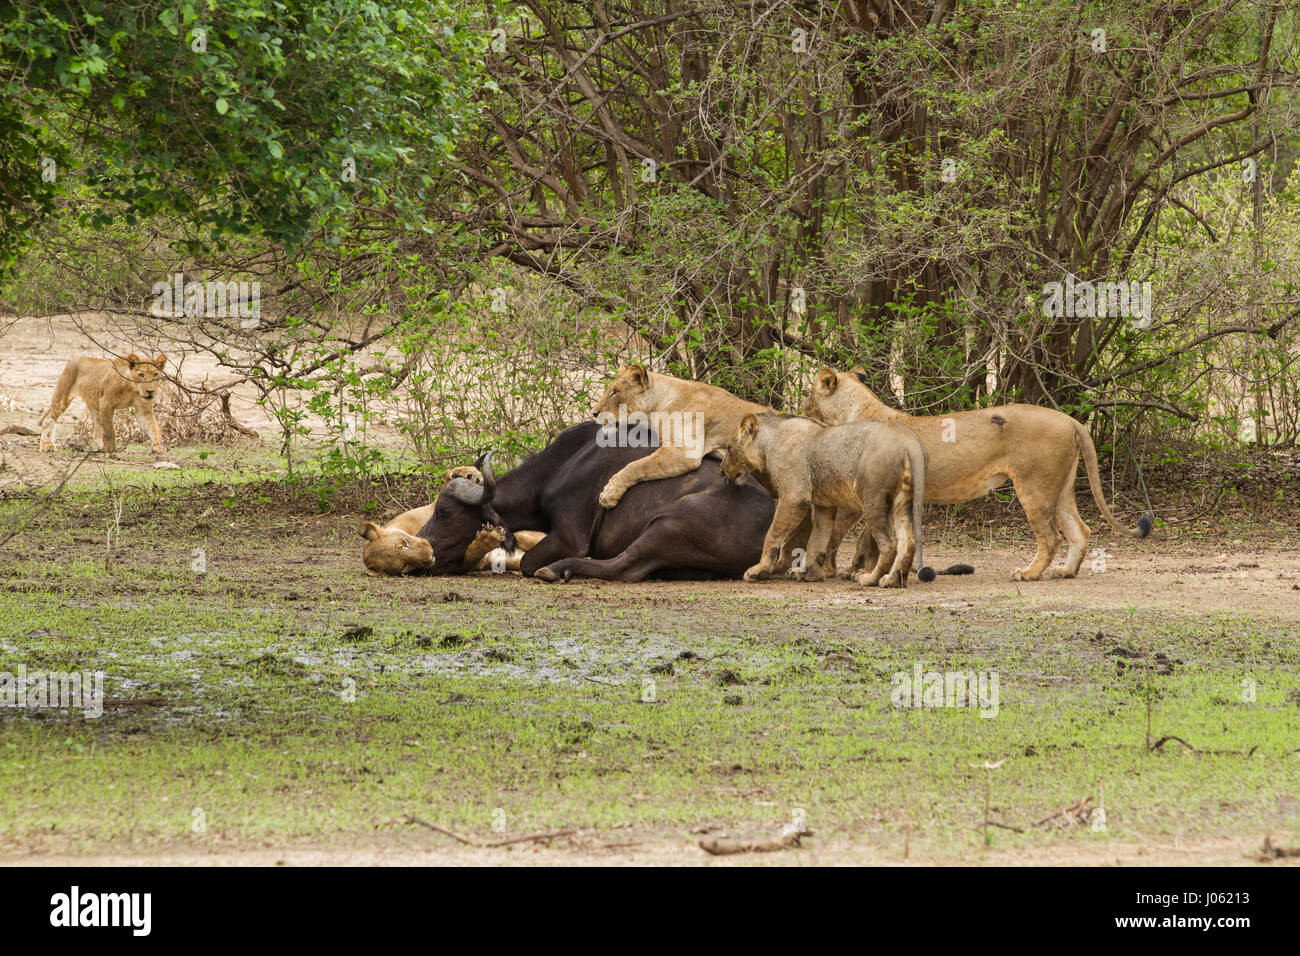 MANA POOLS NATIONAL PARK, ZIMBABWE: GRUESOME pictures and video have  captured nature at its cruellest as a group of lions kills a pregnant  African buffalo before eating her unborn calf. The horrifying